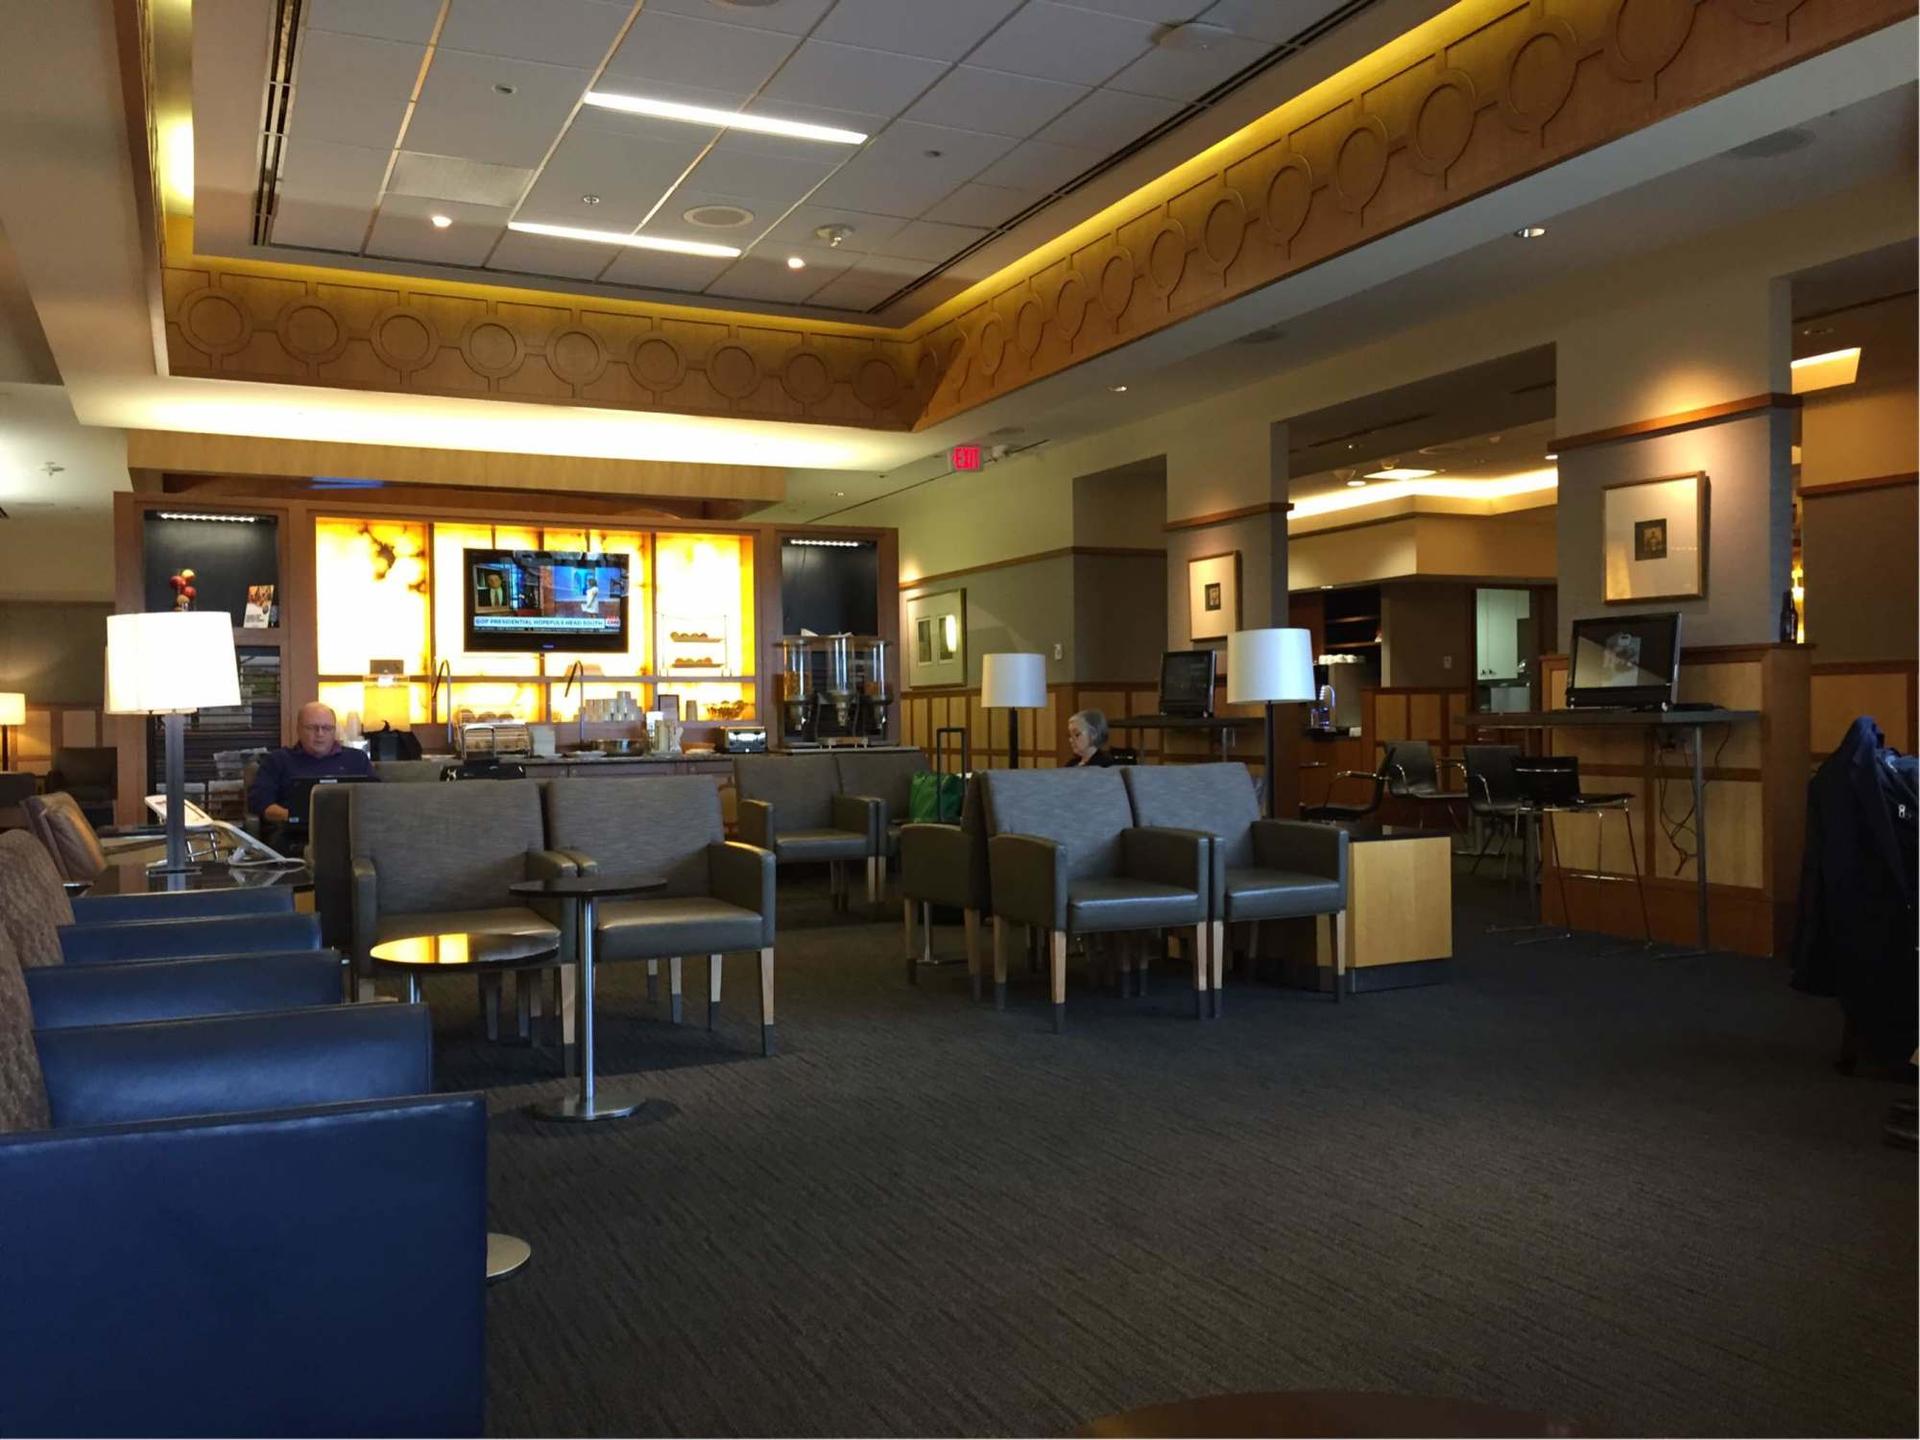 American Airlines Admirals Club image 4 of 7